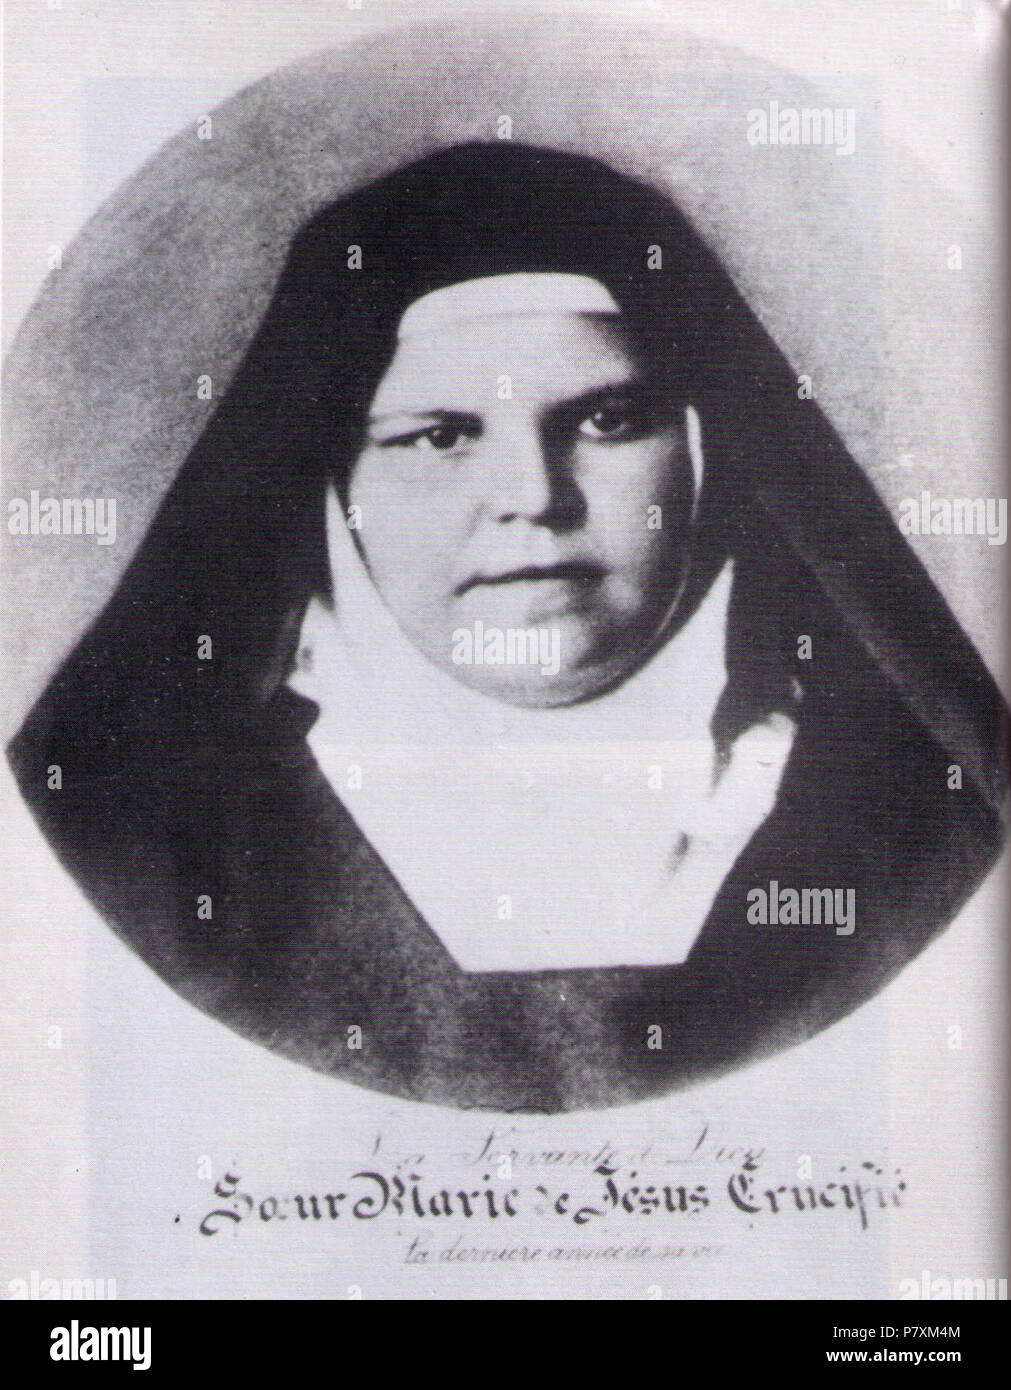 Carmelite Nun High Resolution Stock Photography and Images - Alamy